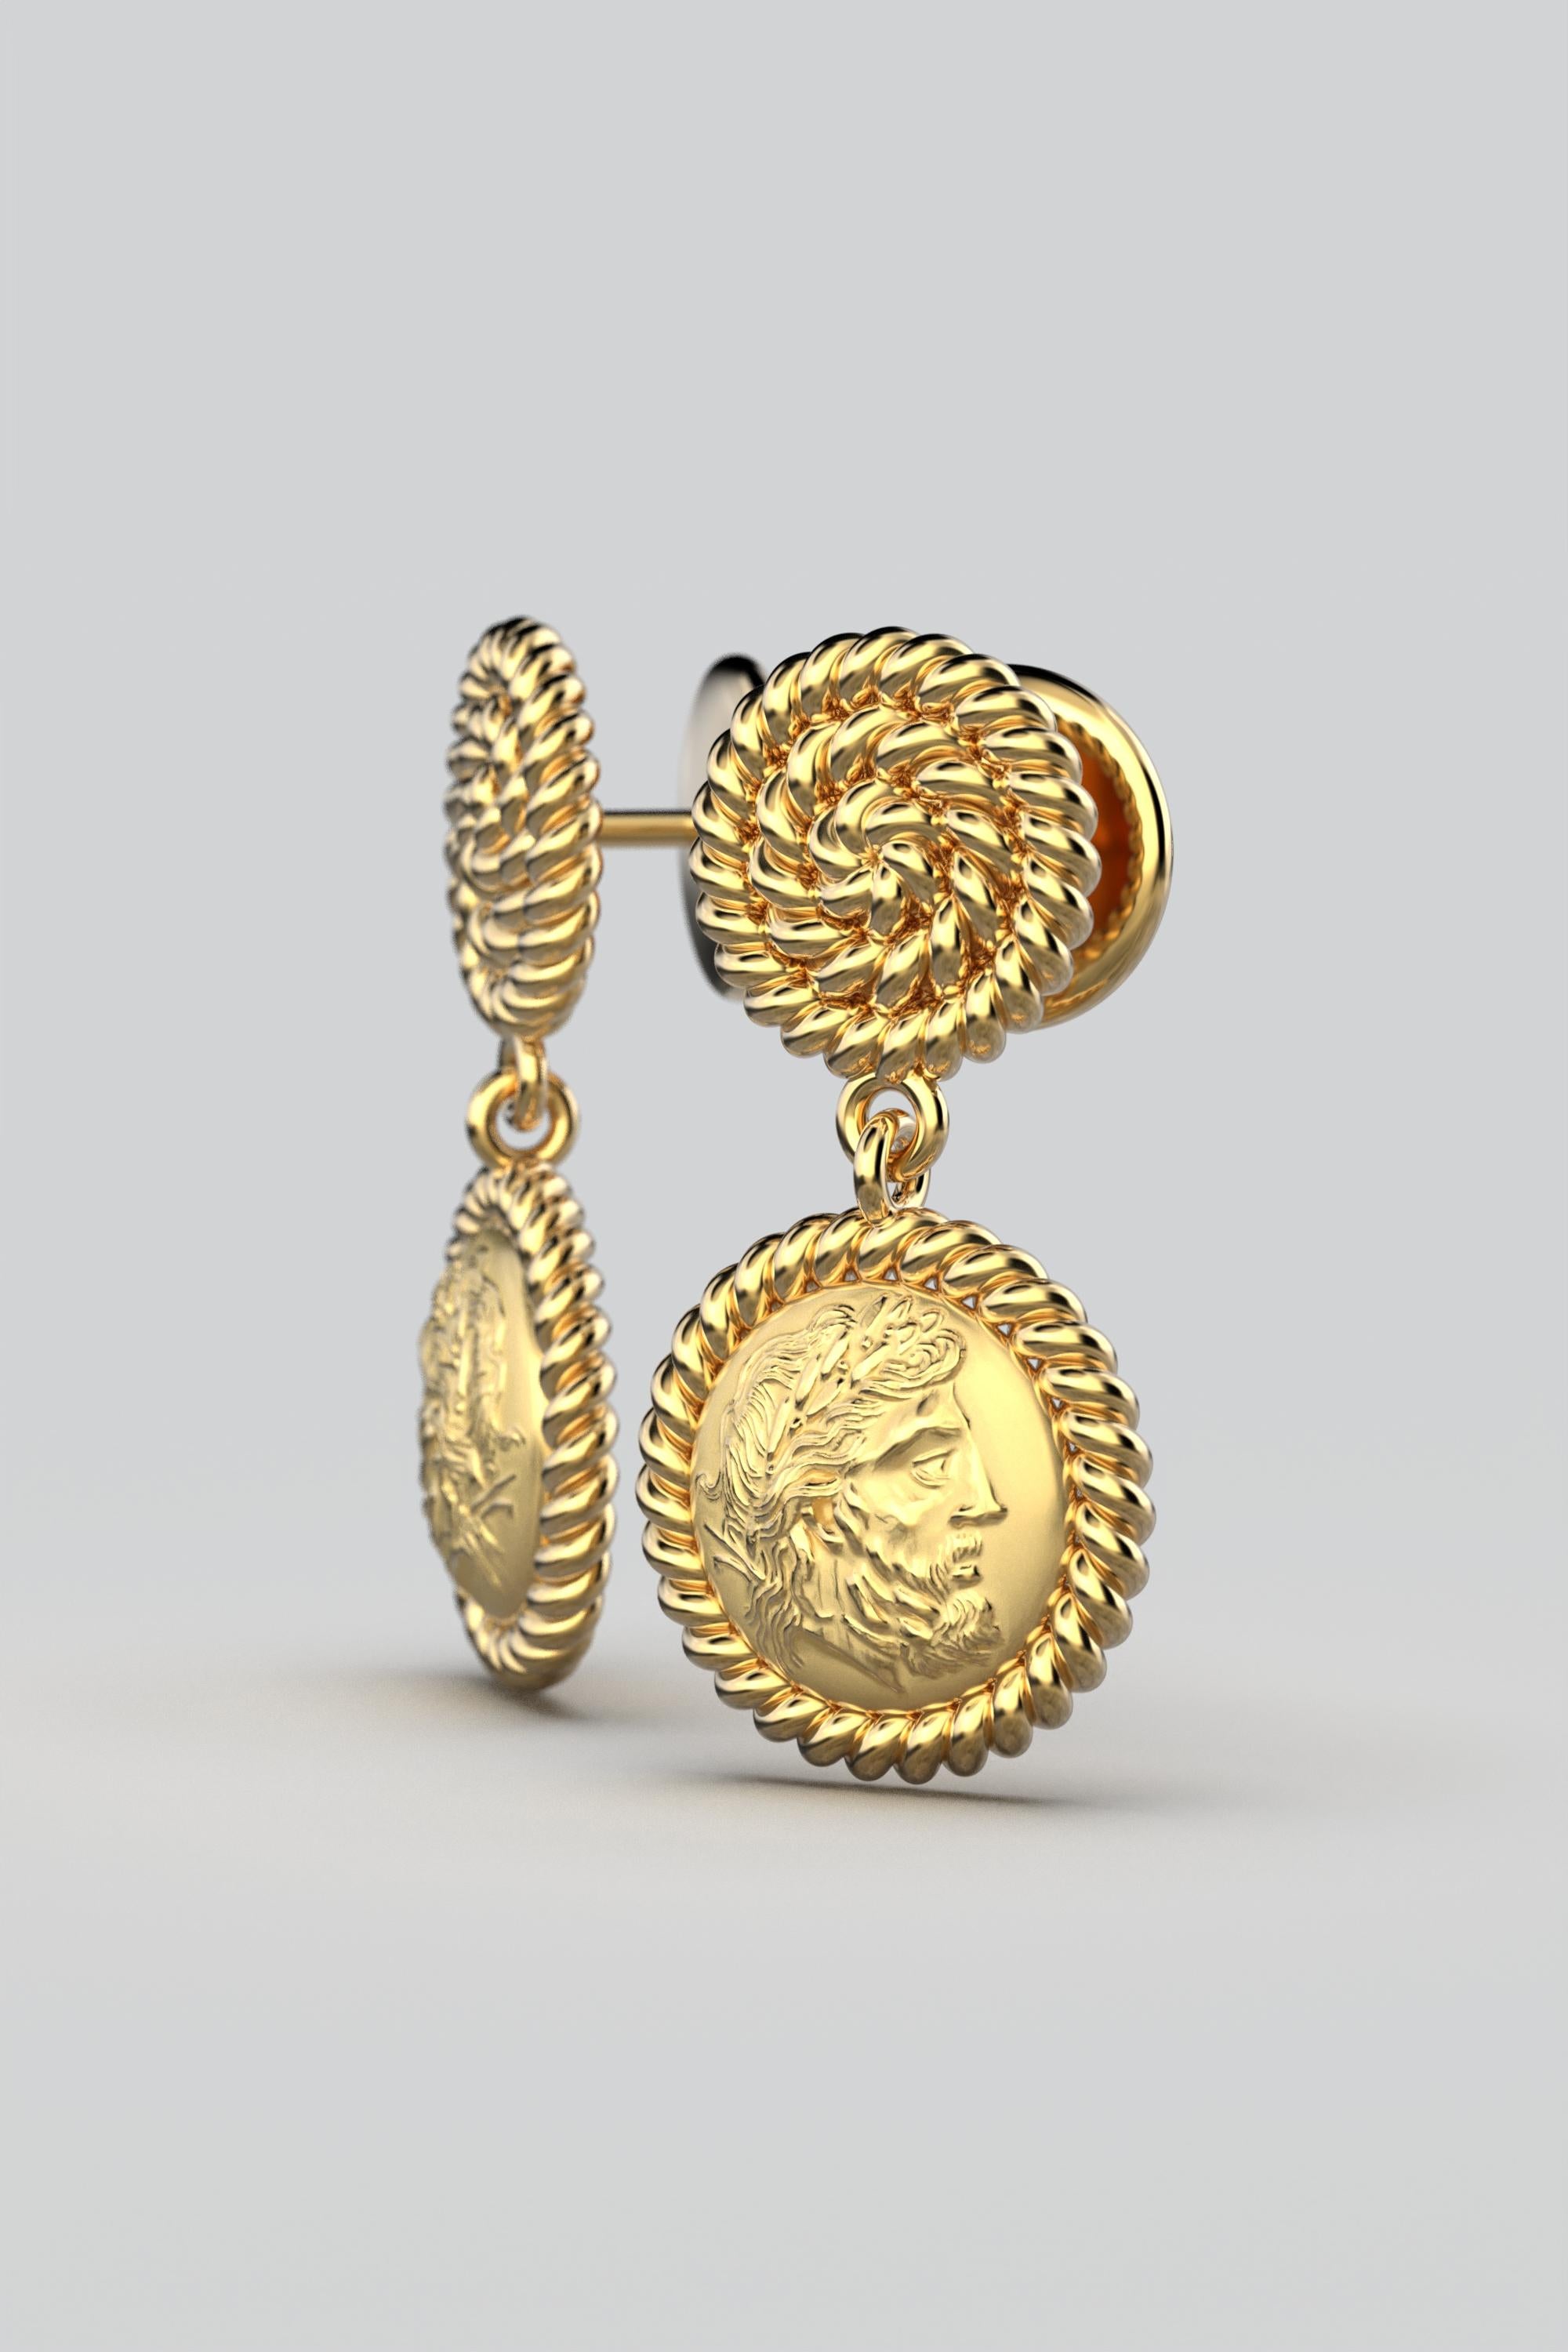 Made to order in 14k Gold. Yellow gold, rose gold or white gold.
Adorn yourself with Italian perfection — Dangle Earrings in 14k or 18k solid gold, inspired by Ancient Greek style. Crafted in Italy, these exquisite Zeus Coin Earrings fuse history